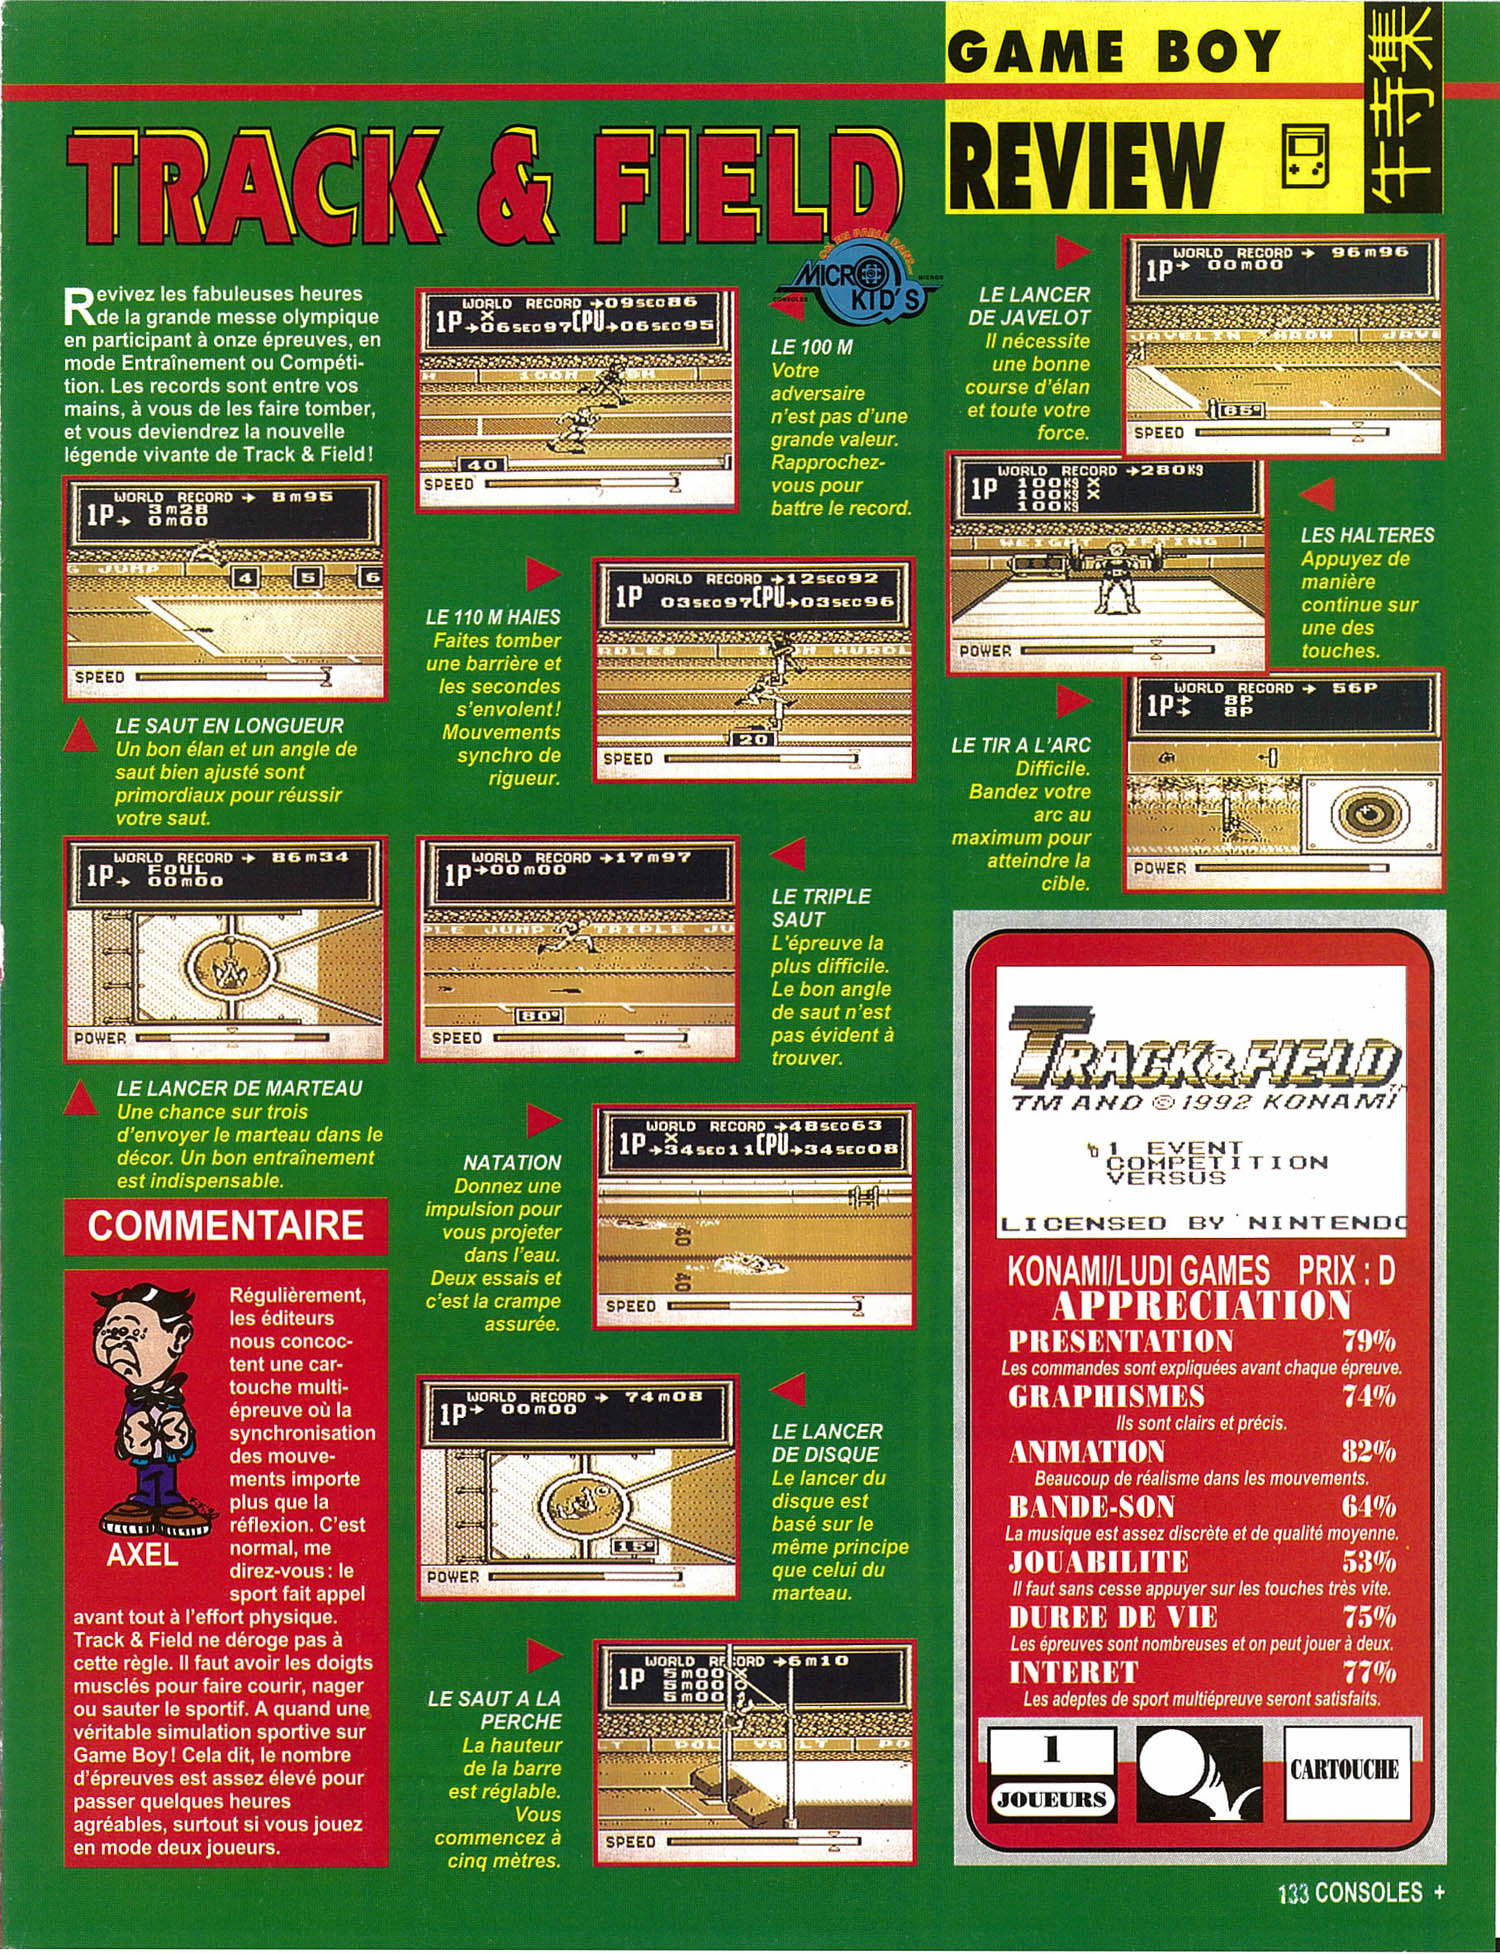 tests//929/Consoles + 019 - Page 133 (avril 1993).jpg